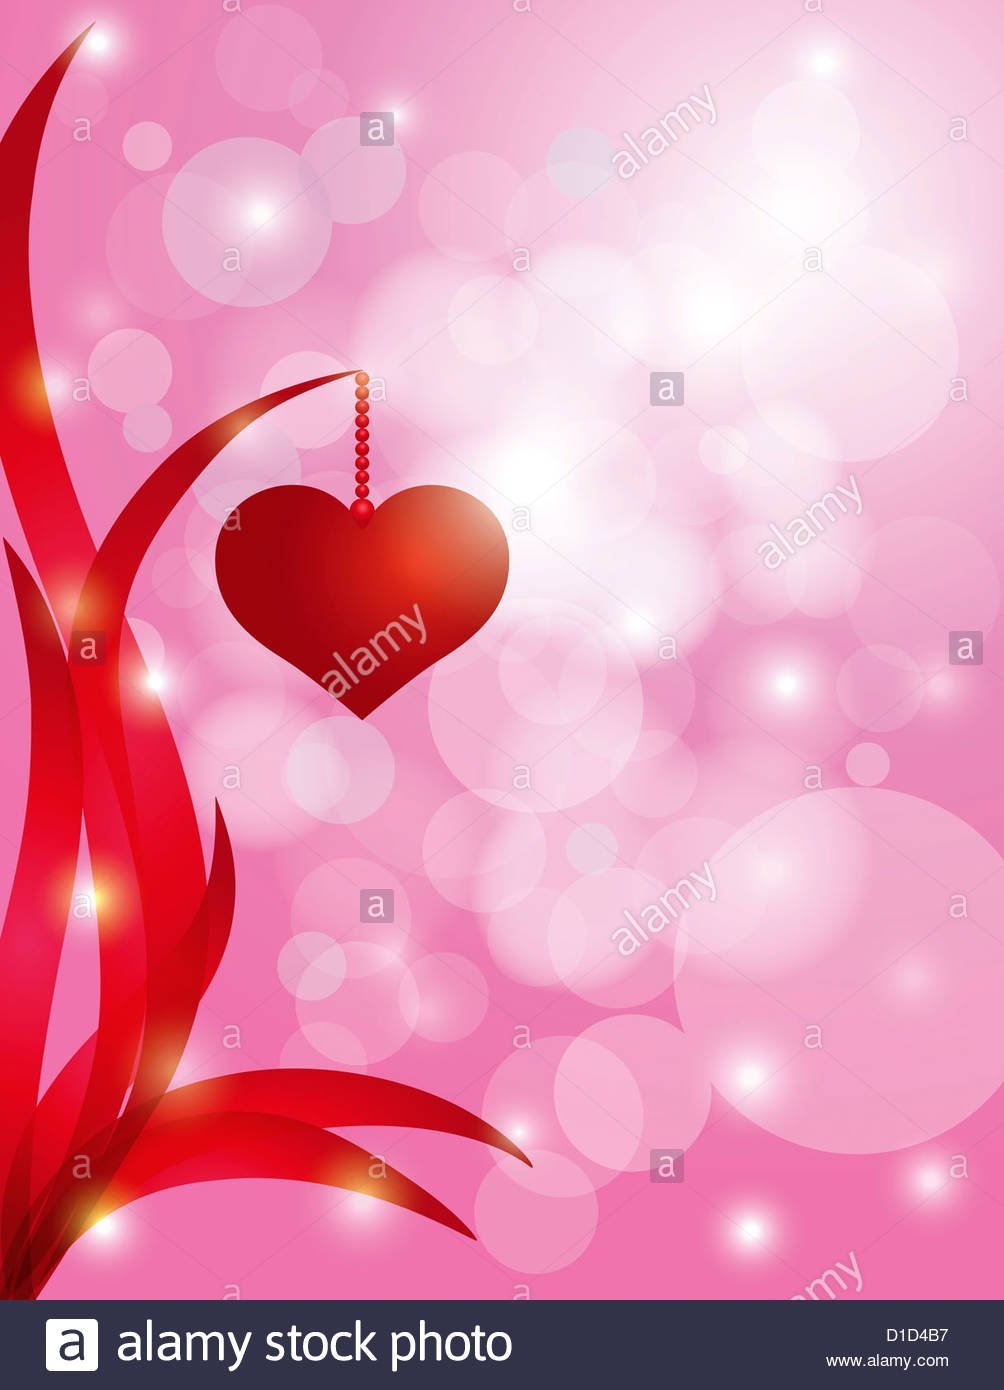 Red Heart Hanging On Swirly Leaf On Sparkling Bokeh Pink